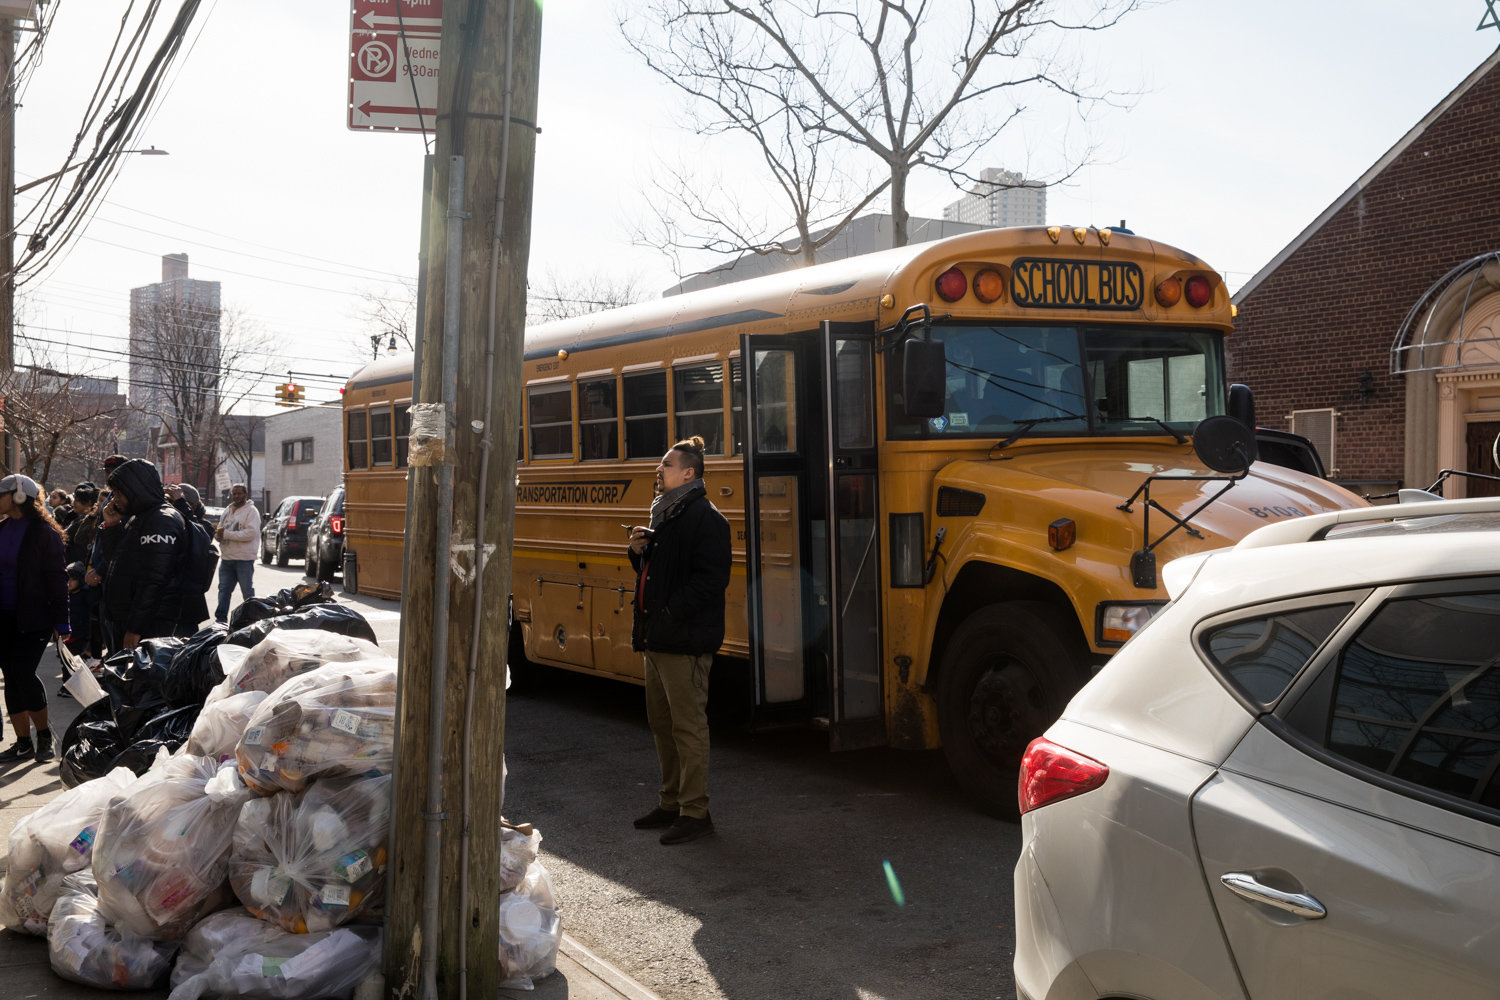 Amber Charter School students board a school bus, an activity that could soon be a thing of the past if administrators get their way. Some parents are fighting the school’s plan to discontinue bus service later this year.